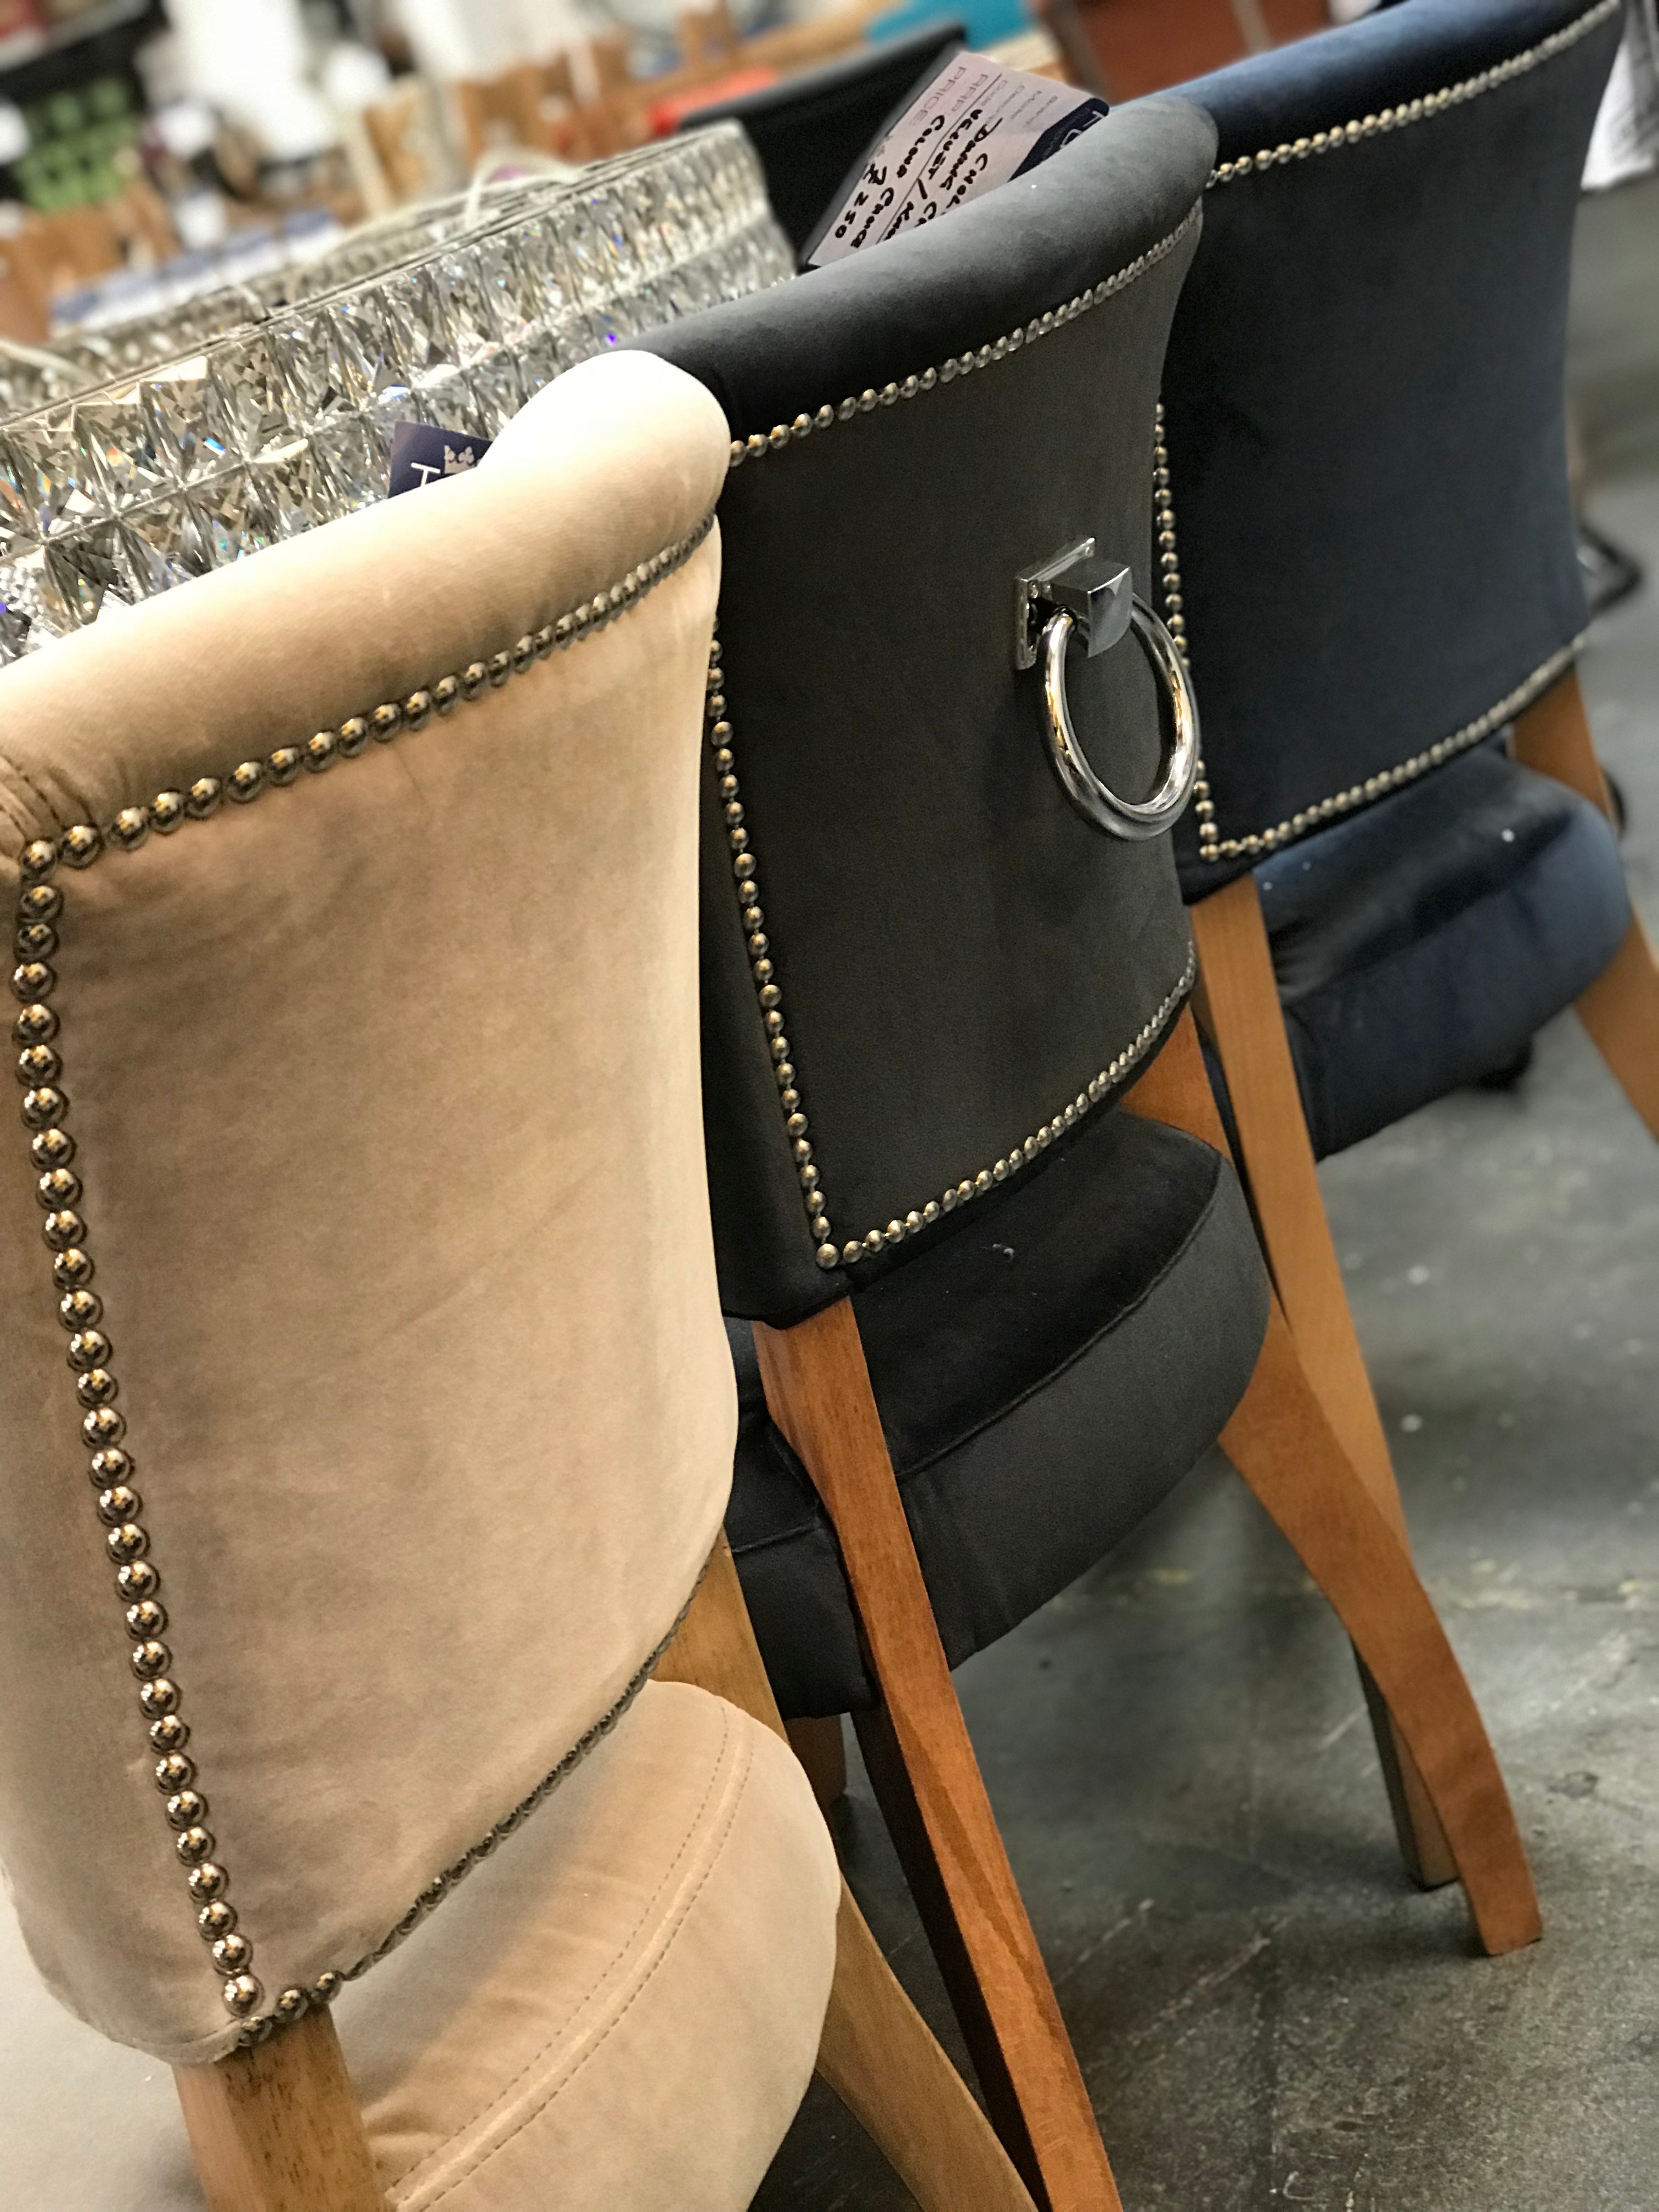 Mimi Knocker Dining Chairs from Top Secret Furniture